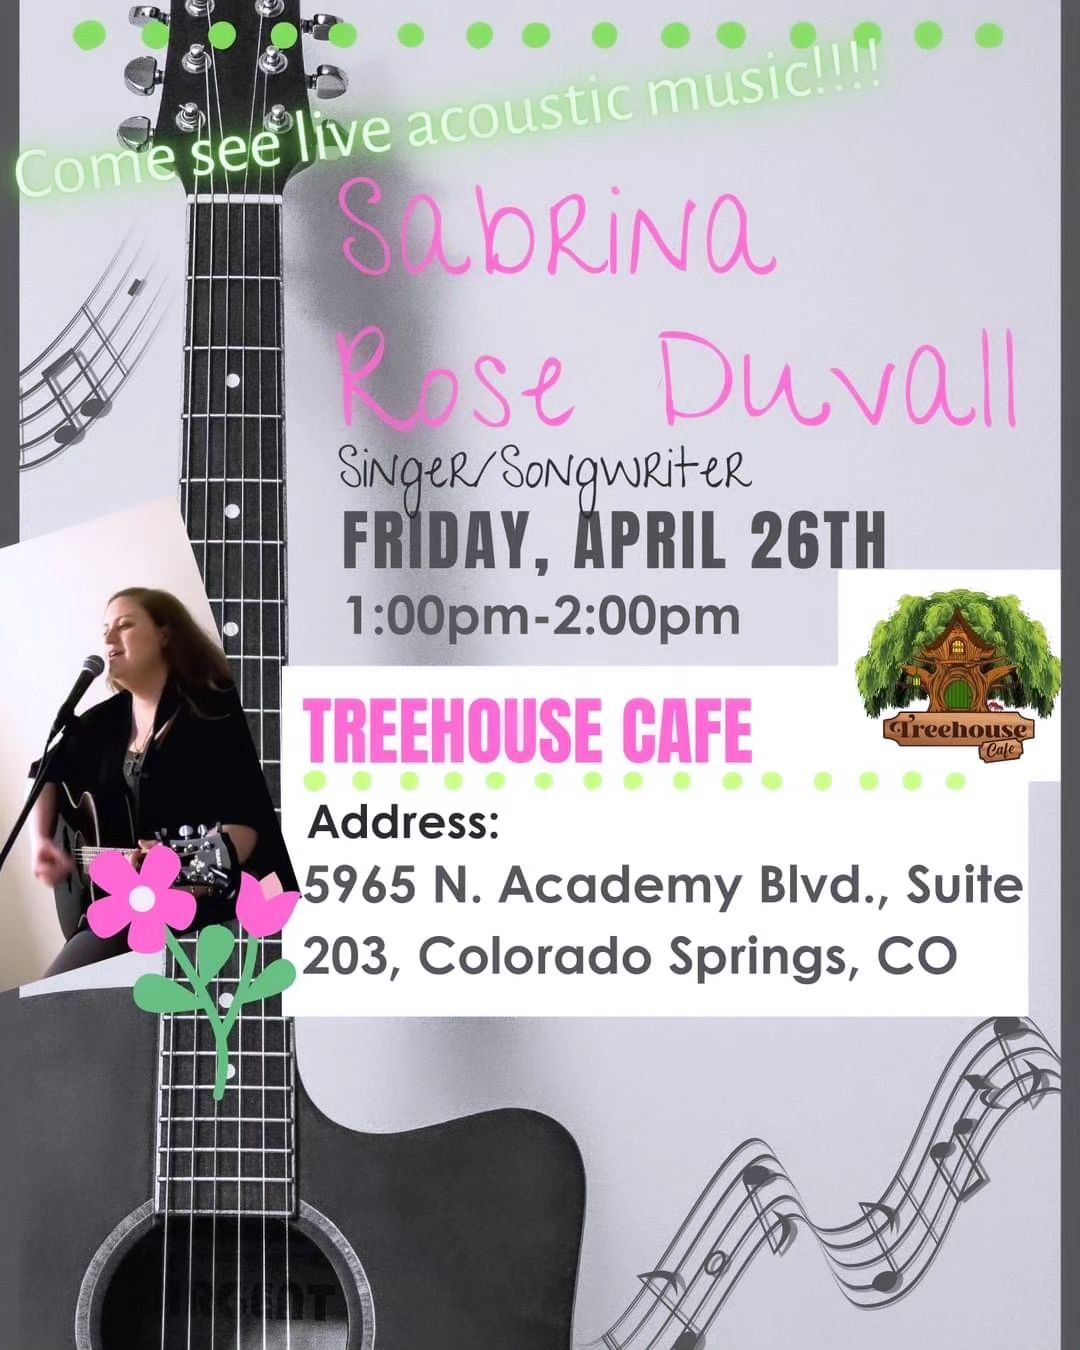 Live music with Sabrina Rose!
This will be a live acoustic performance at Treehouse Cafe from 1:00pm-2:00pm on April 26.
There's no admission fee for this event!
 https://facebook.com/events/s/sabrina-rose-duvall-treehouse-/3873779689614893/